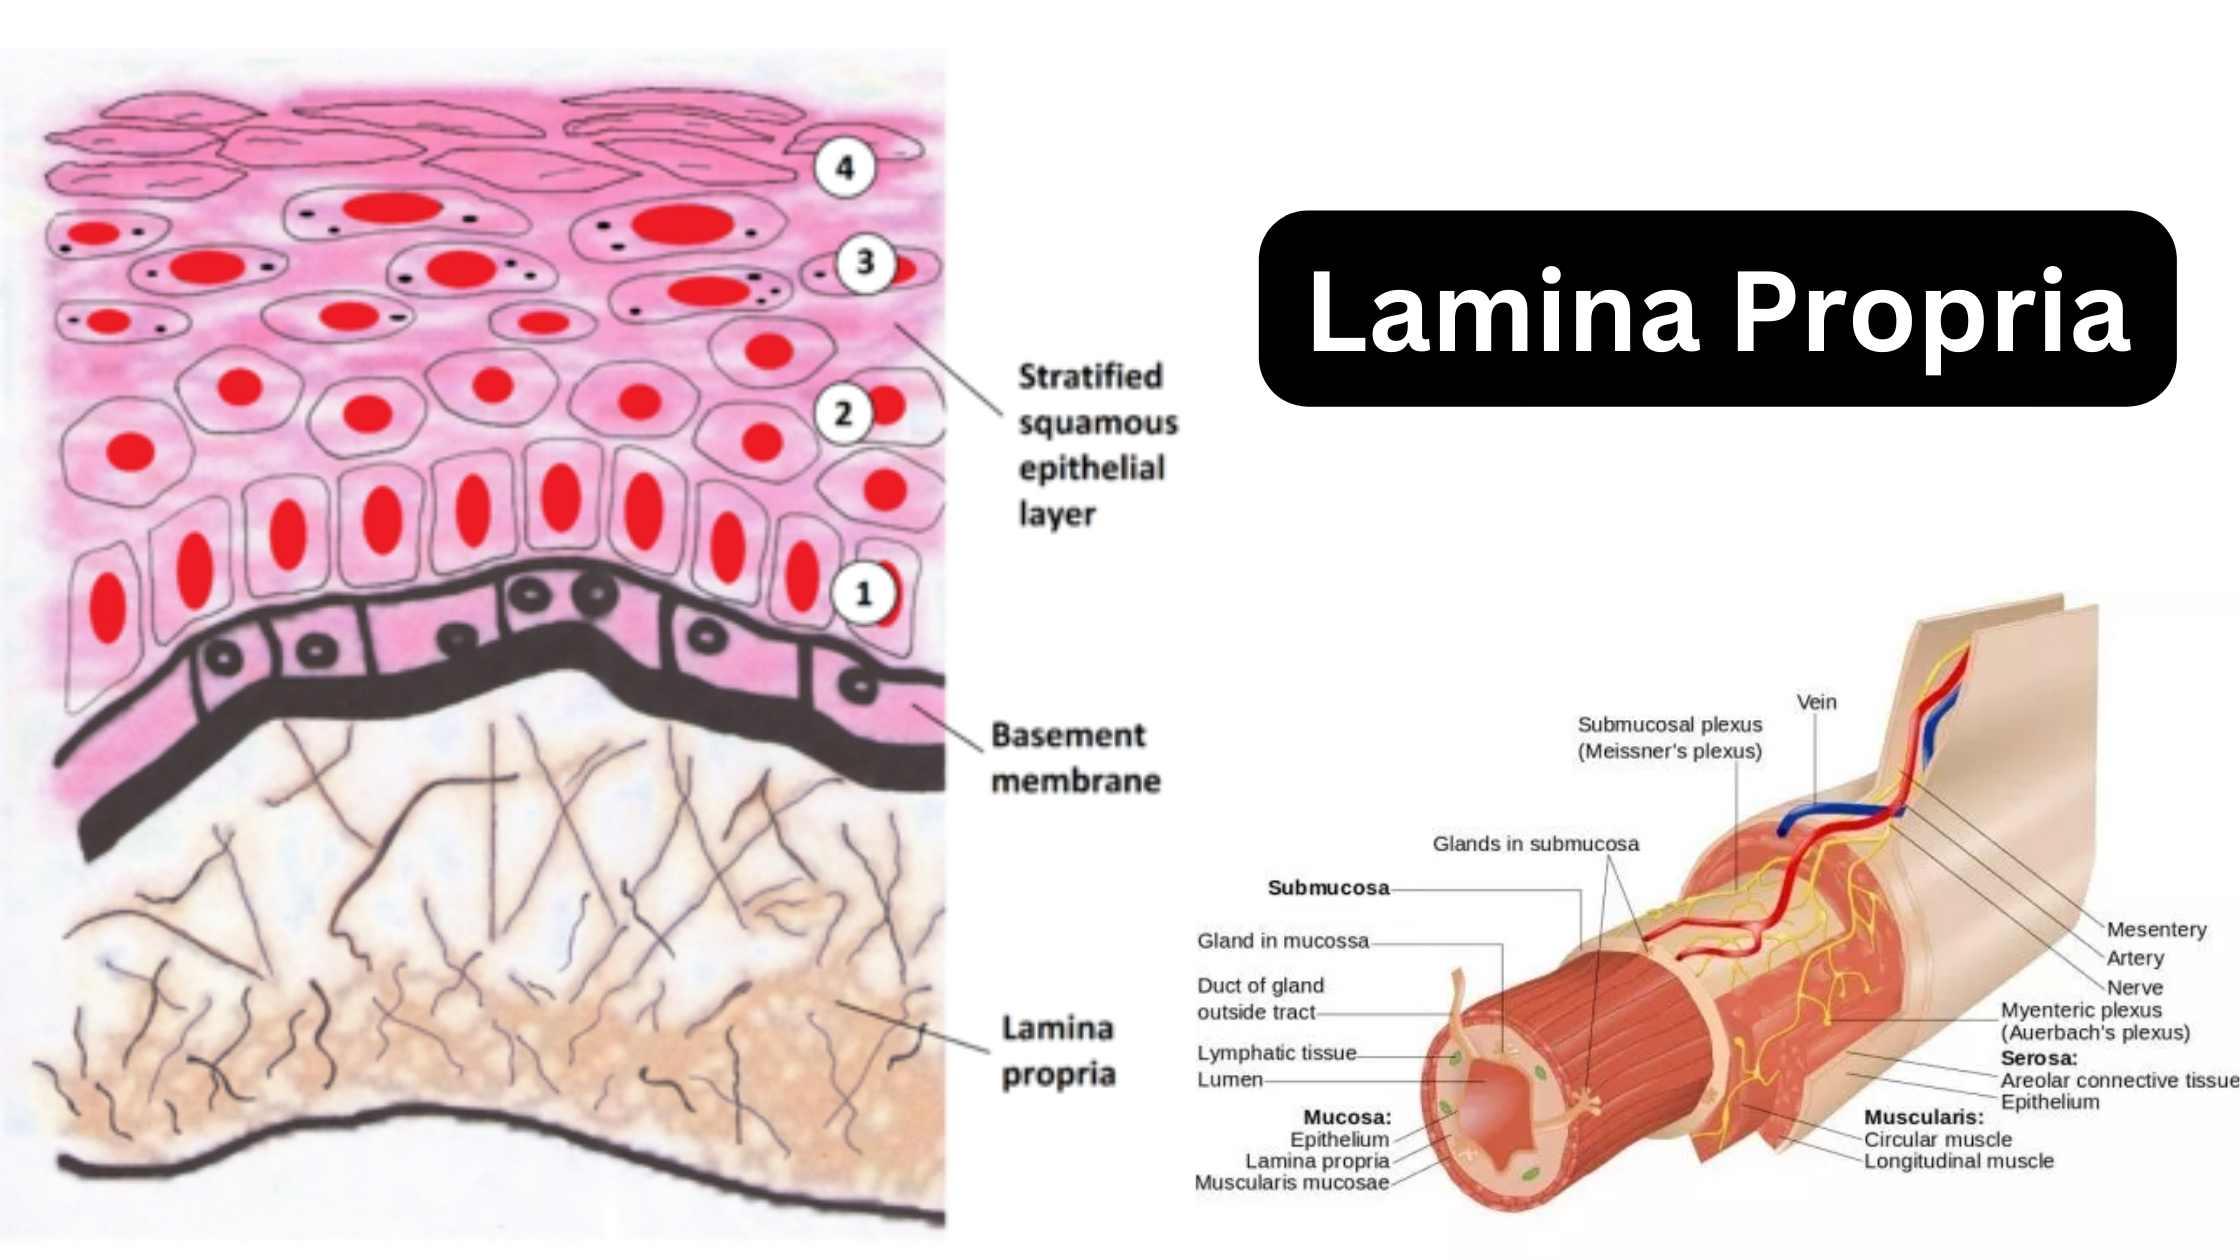 Lamina Propria - Definition, Structure, Functions